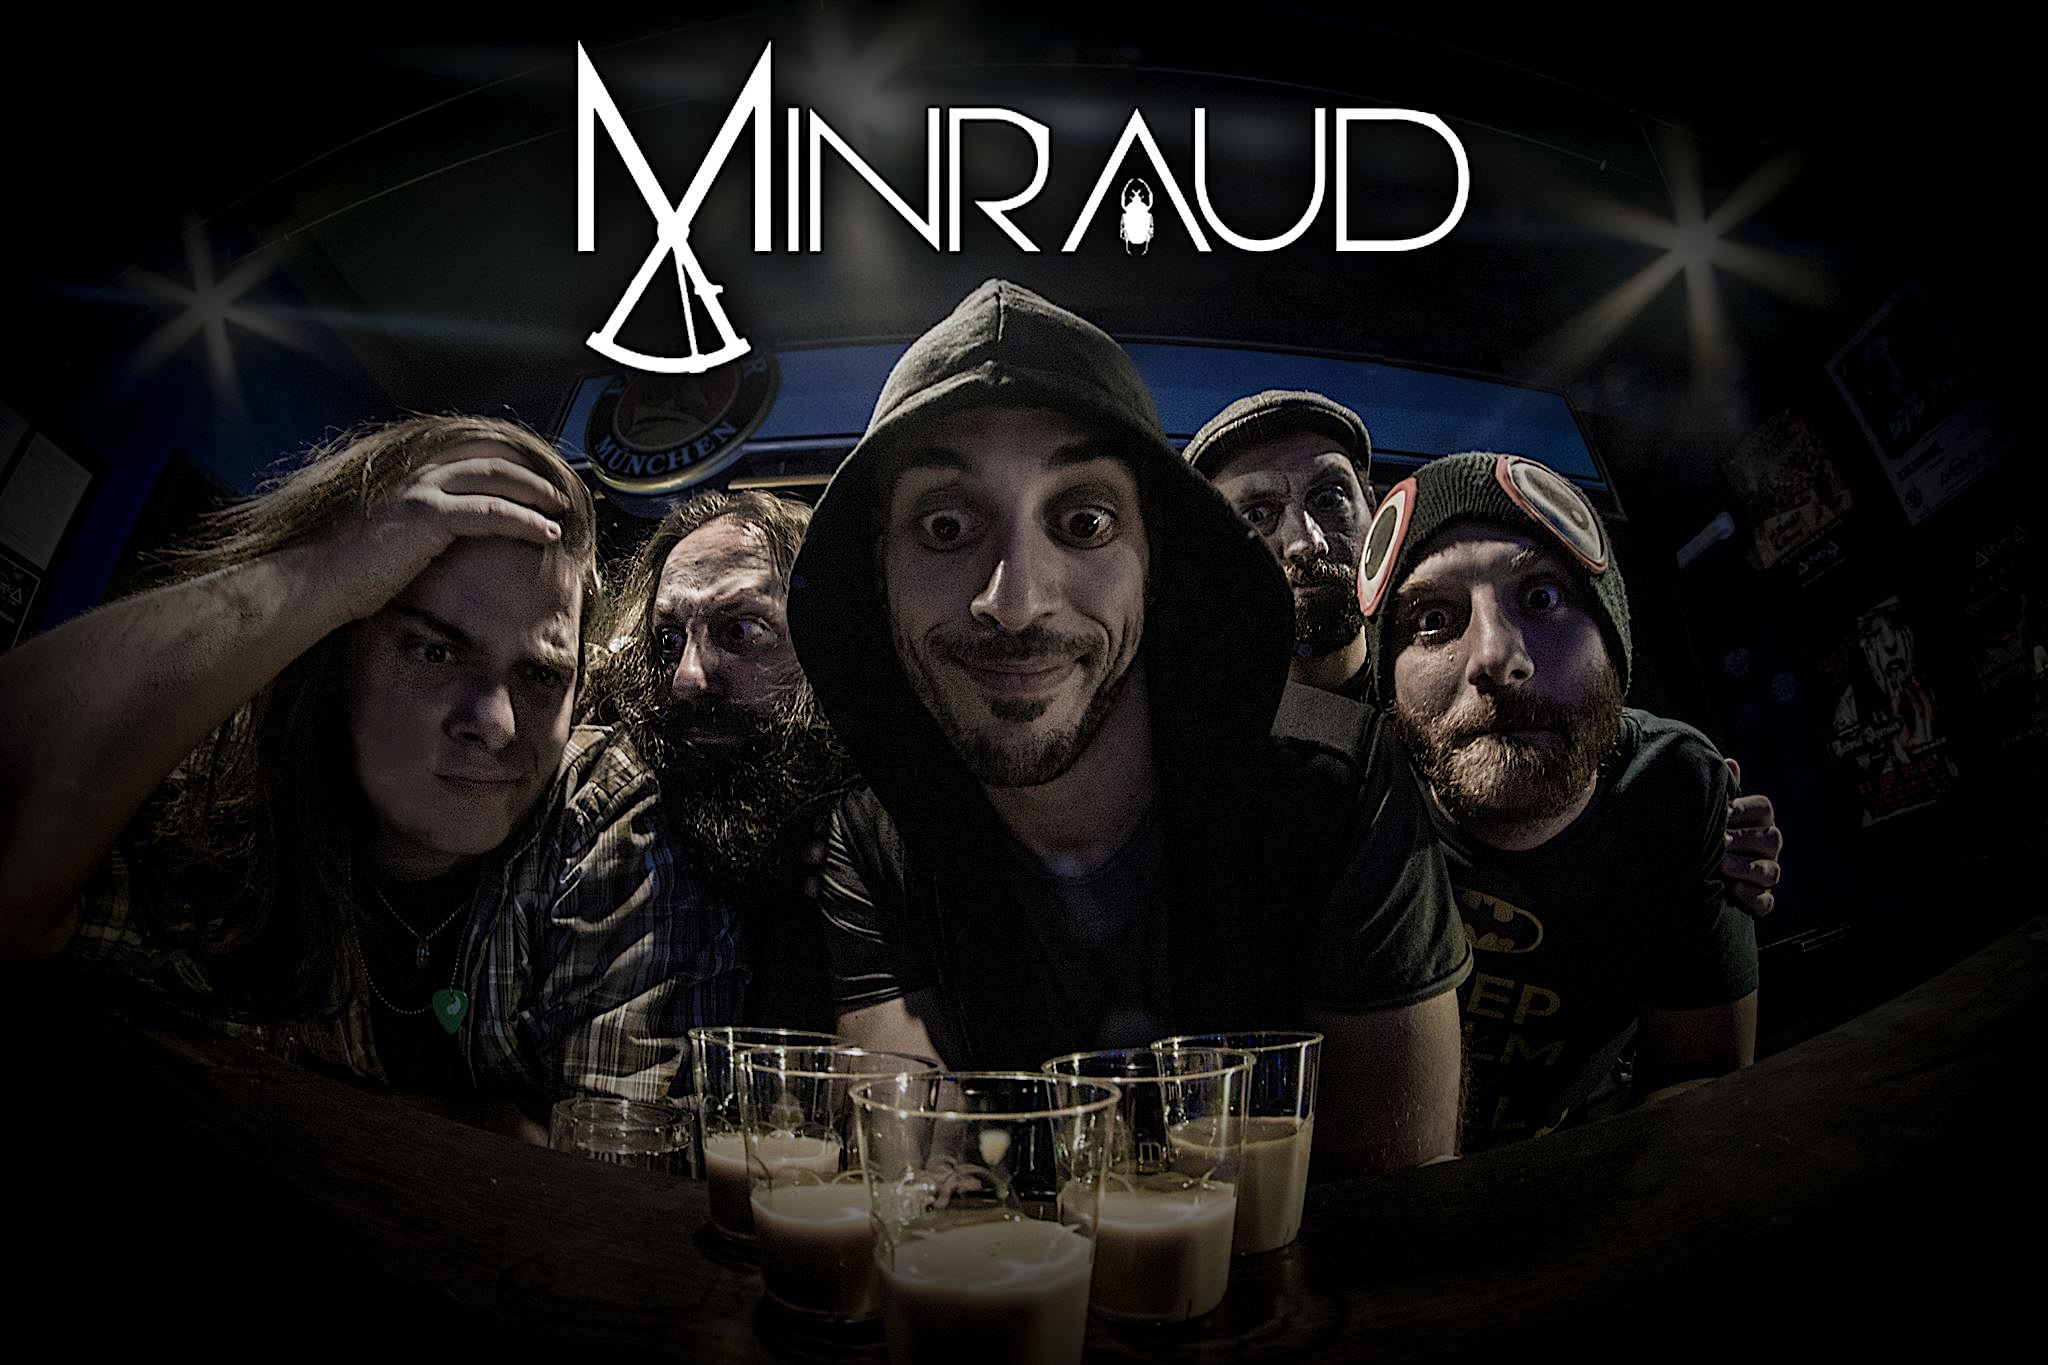 MINRAUD picture